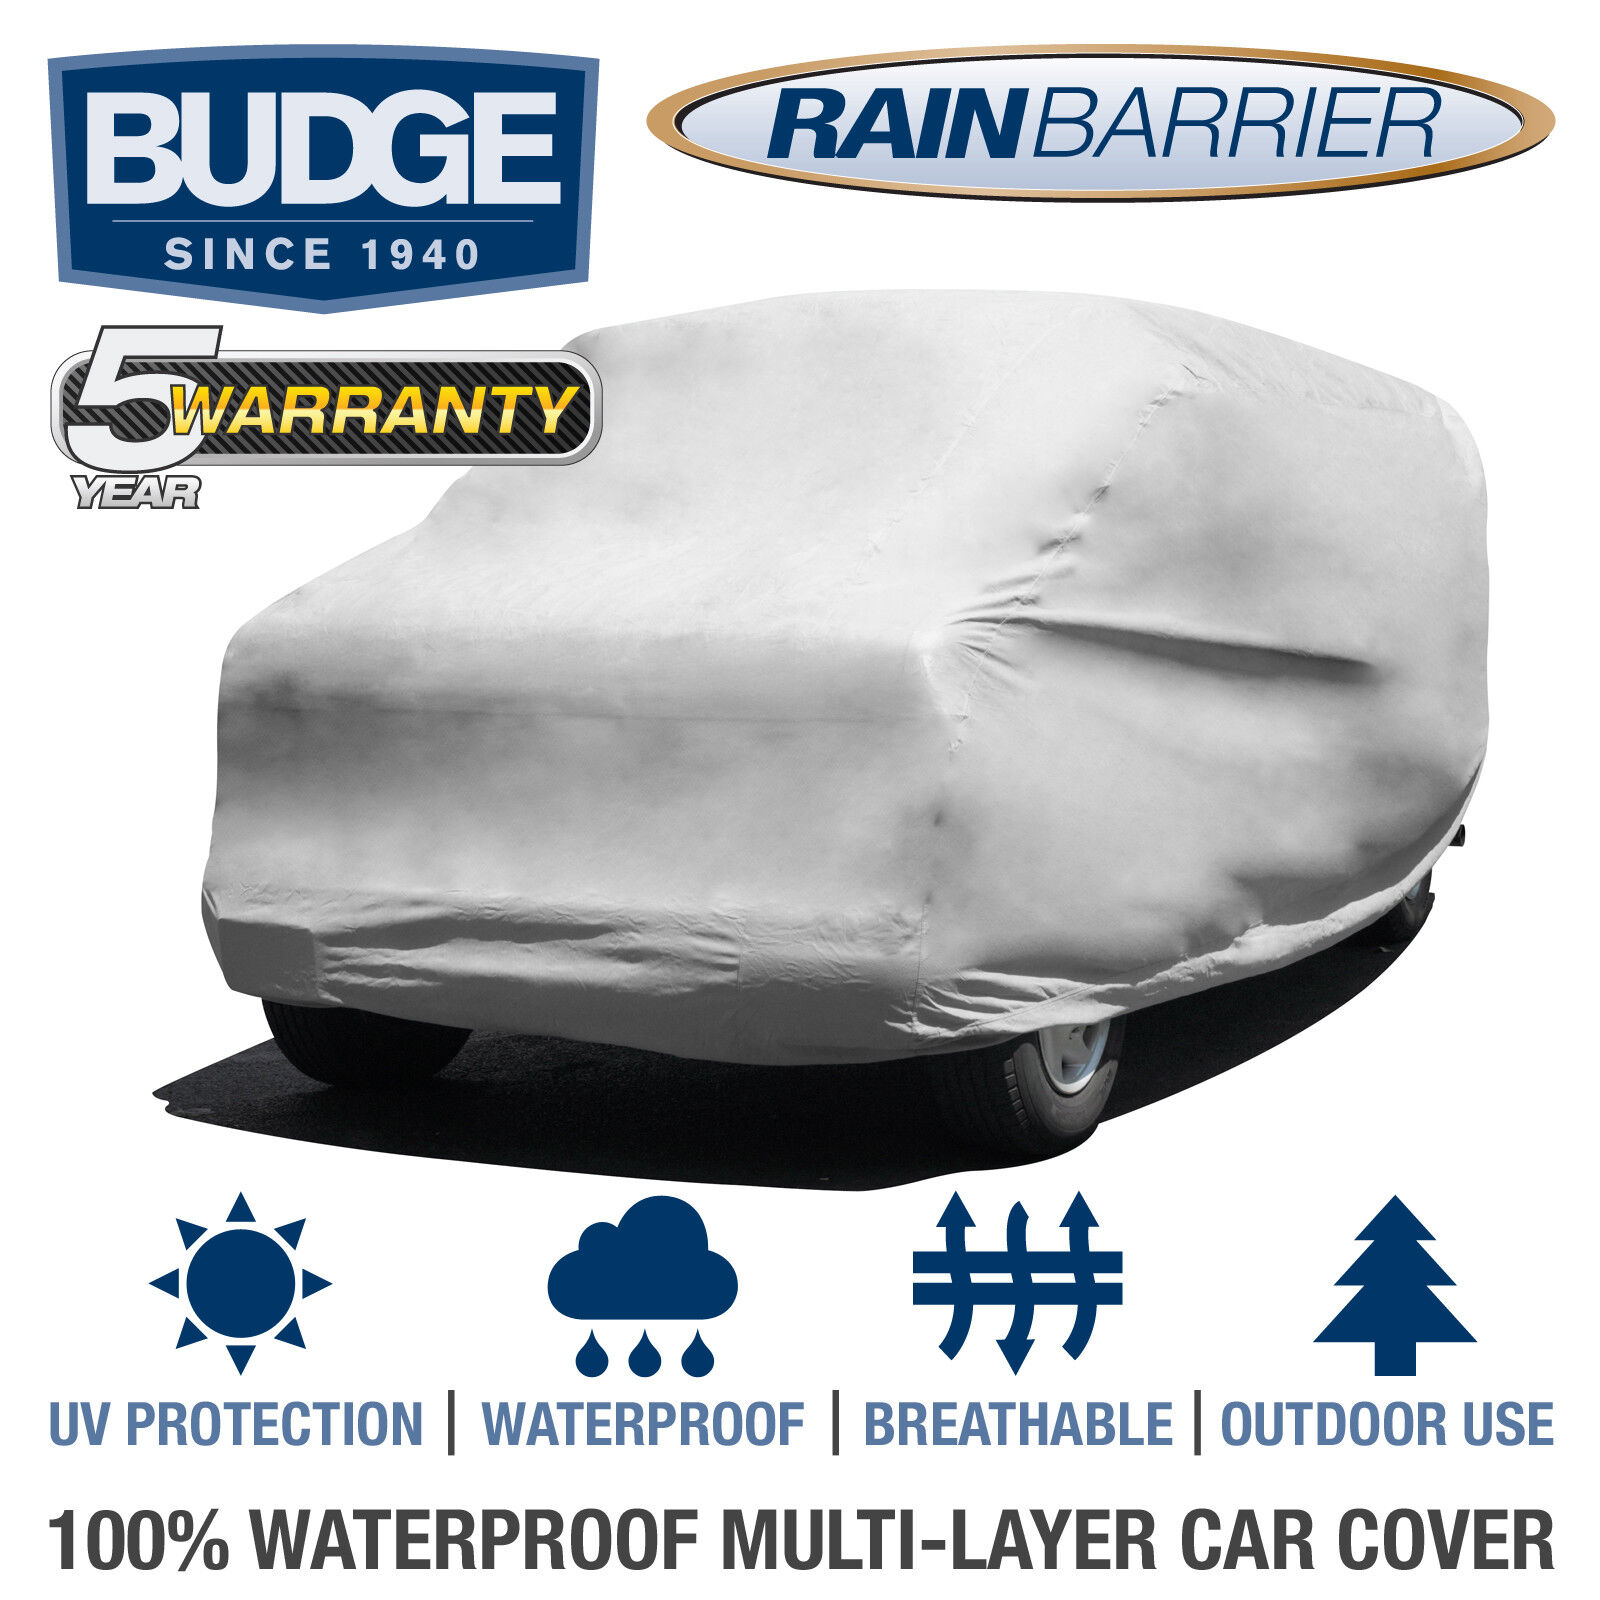 Budge Rain Barrier Van Cover Fits Full Size Vans up to 19\'6\